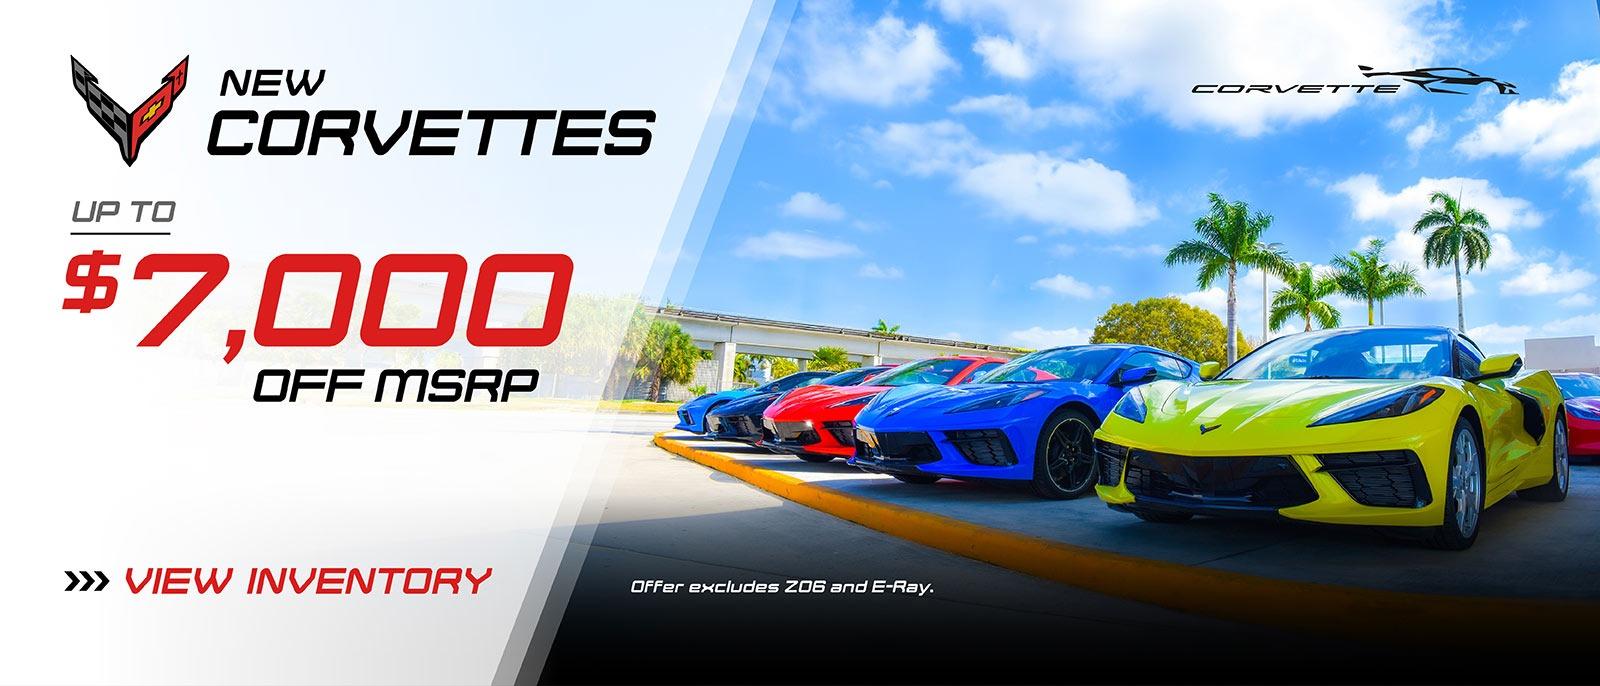 New Corvettes Up to $7000 off MSRP at Bomnin Chevrolet in Miami